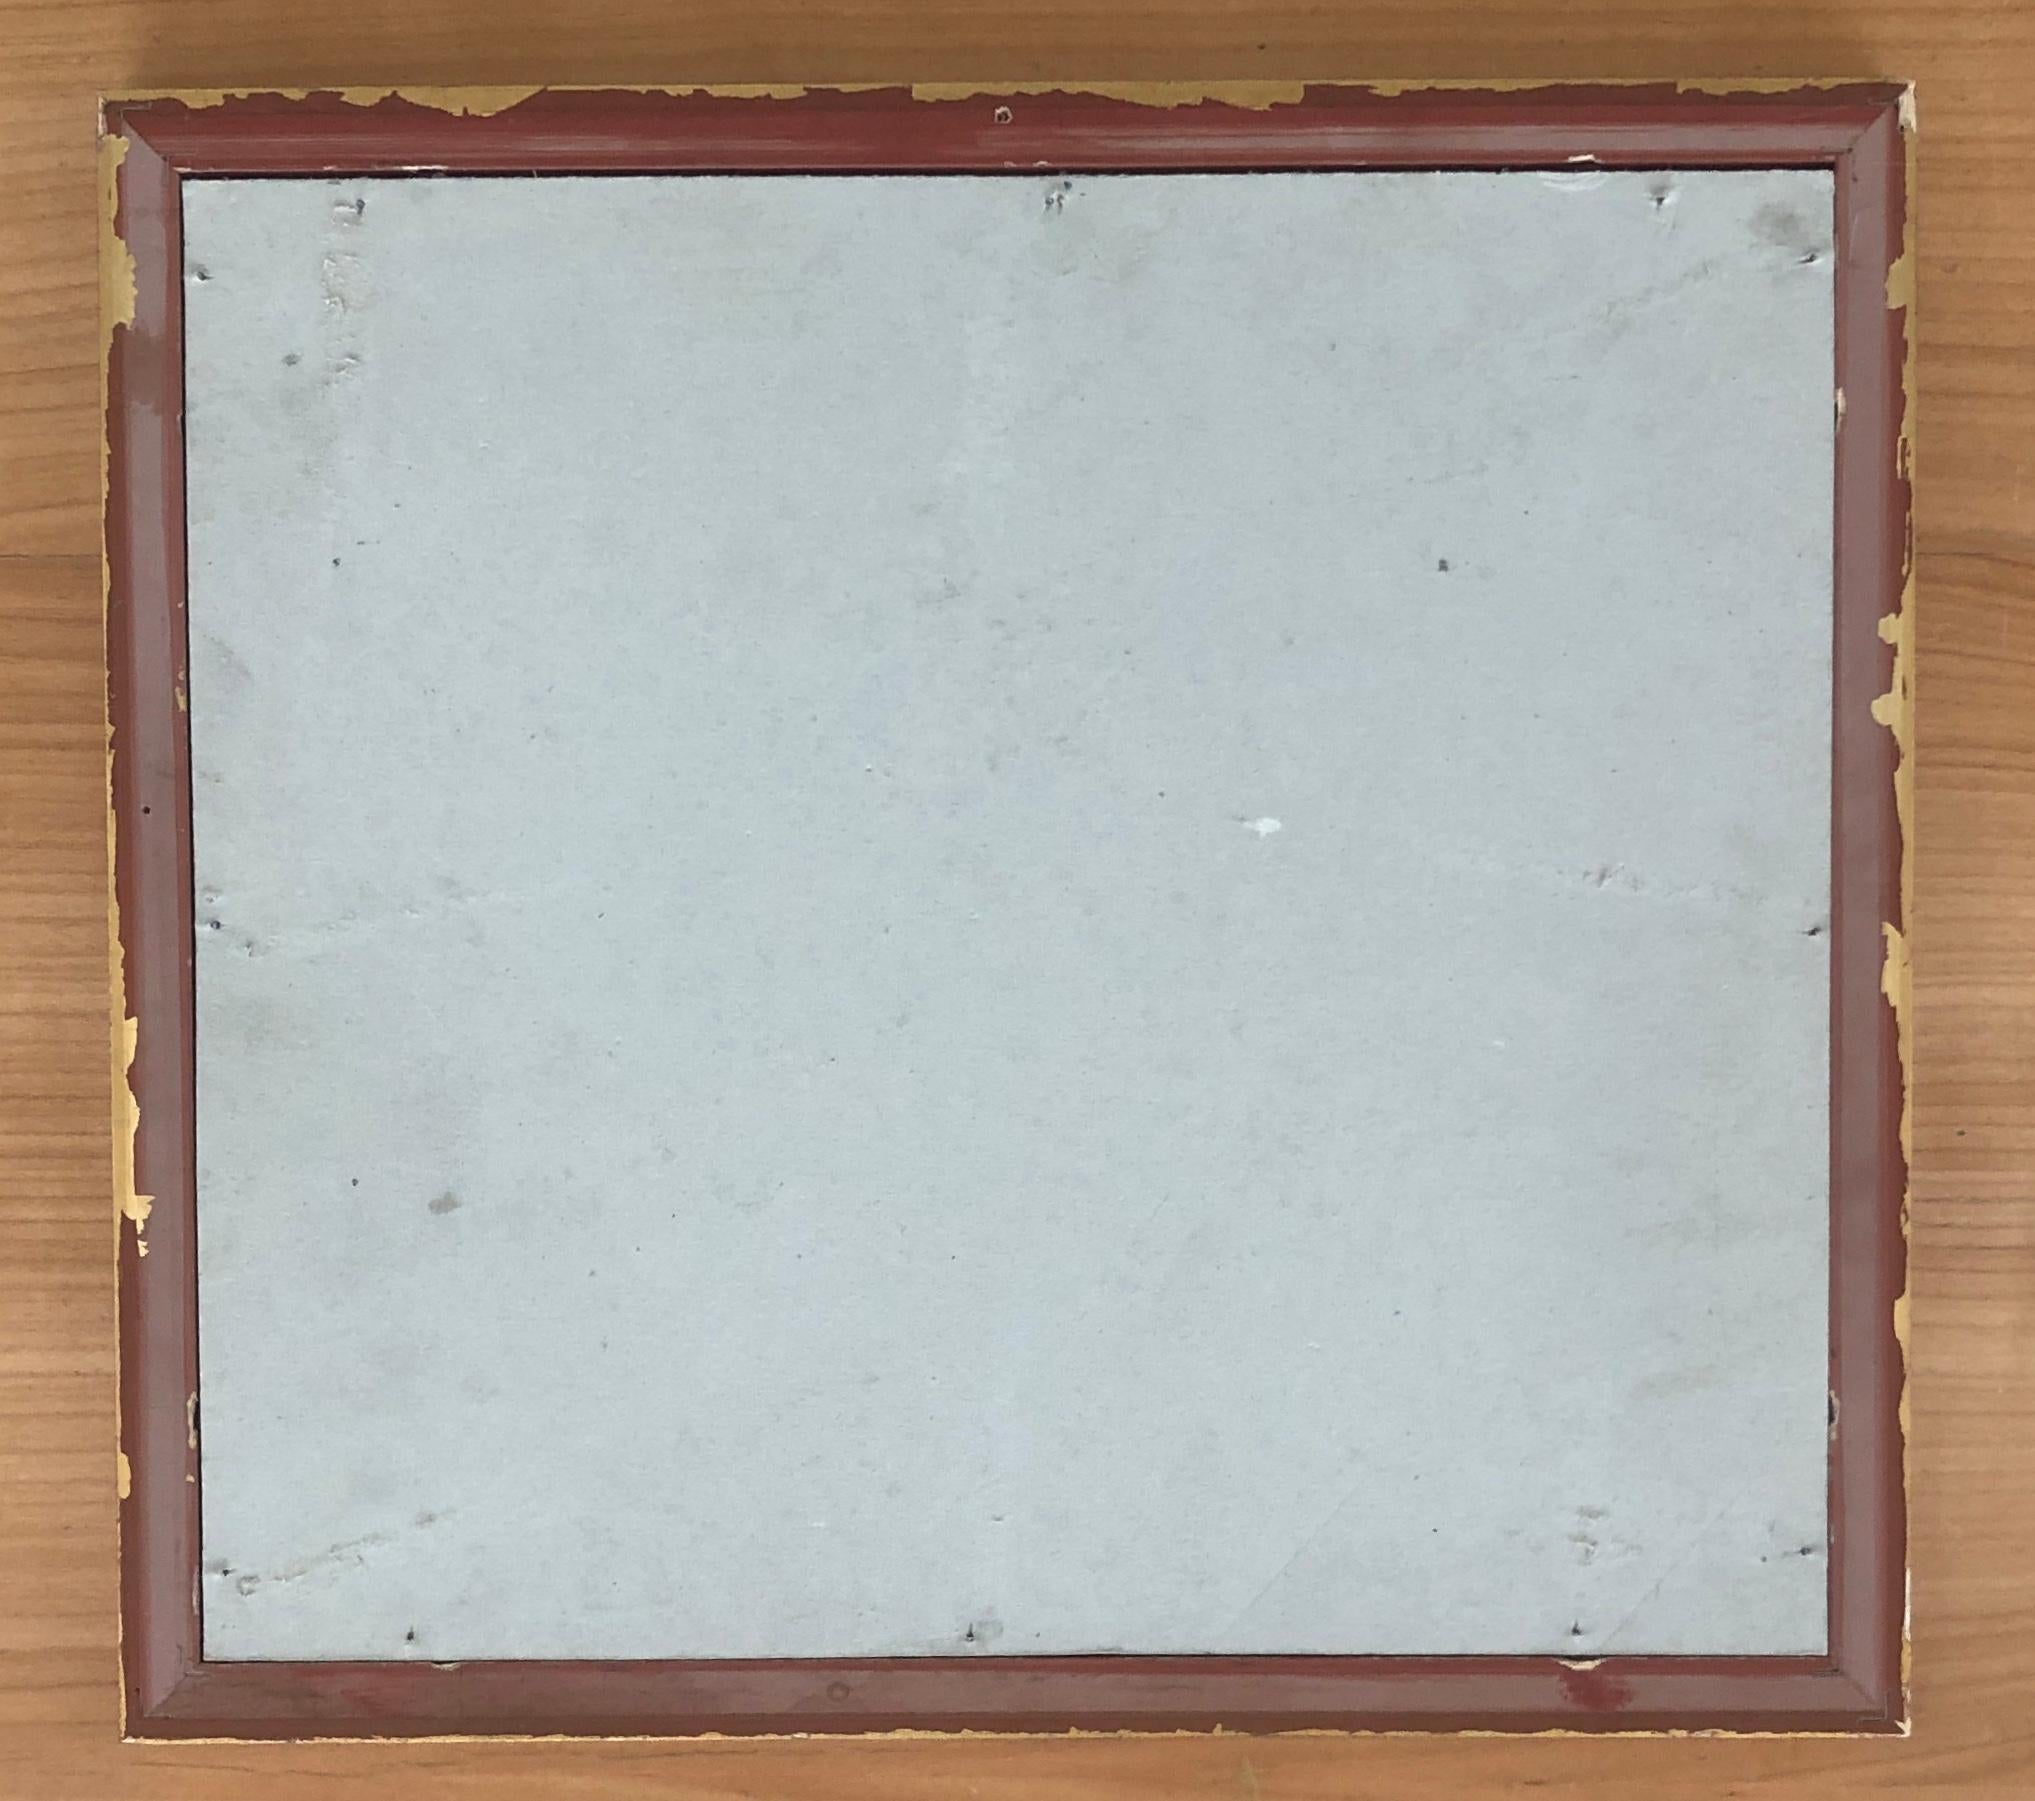 Mixed technique on paper

Golden wooden frame with glass pane
34.7 x 38.2 x 1.8 cm